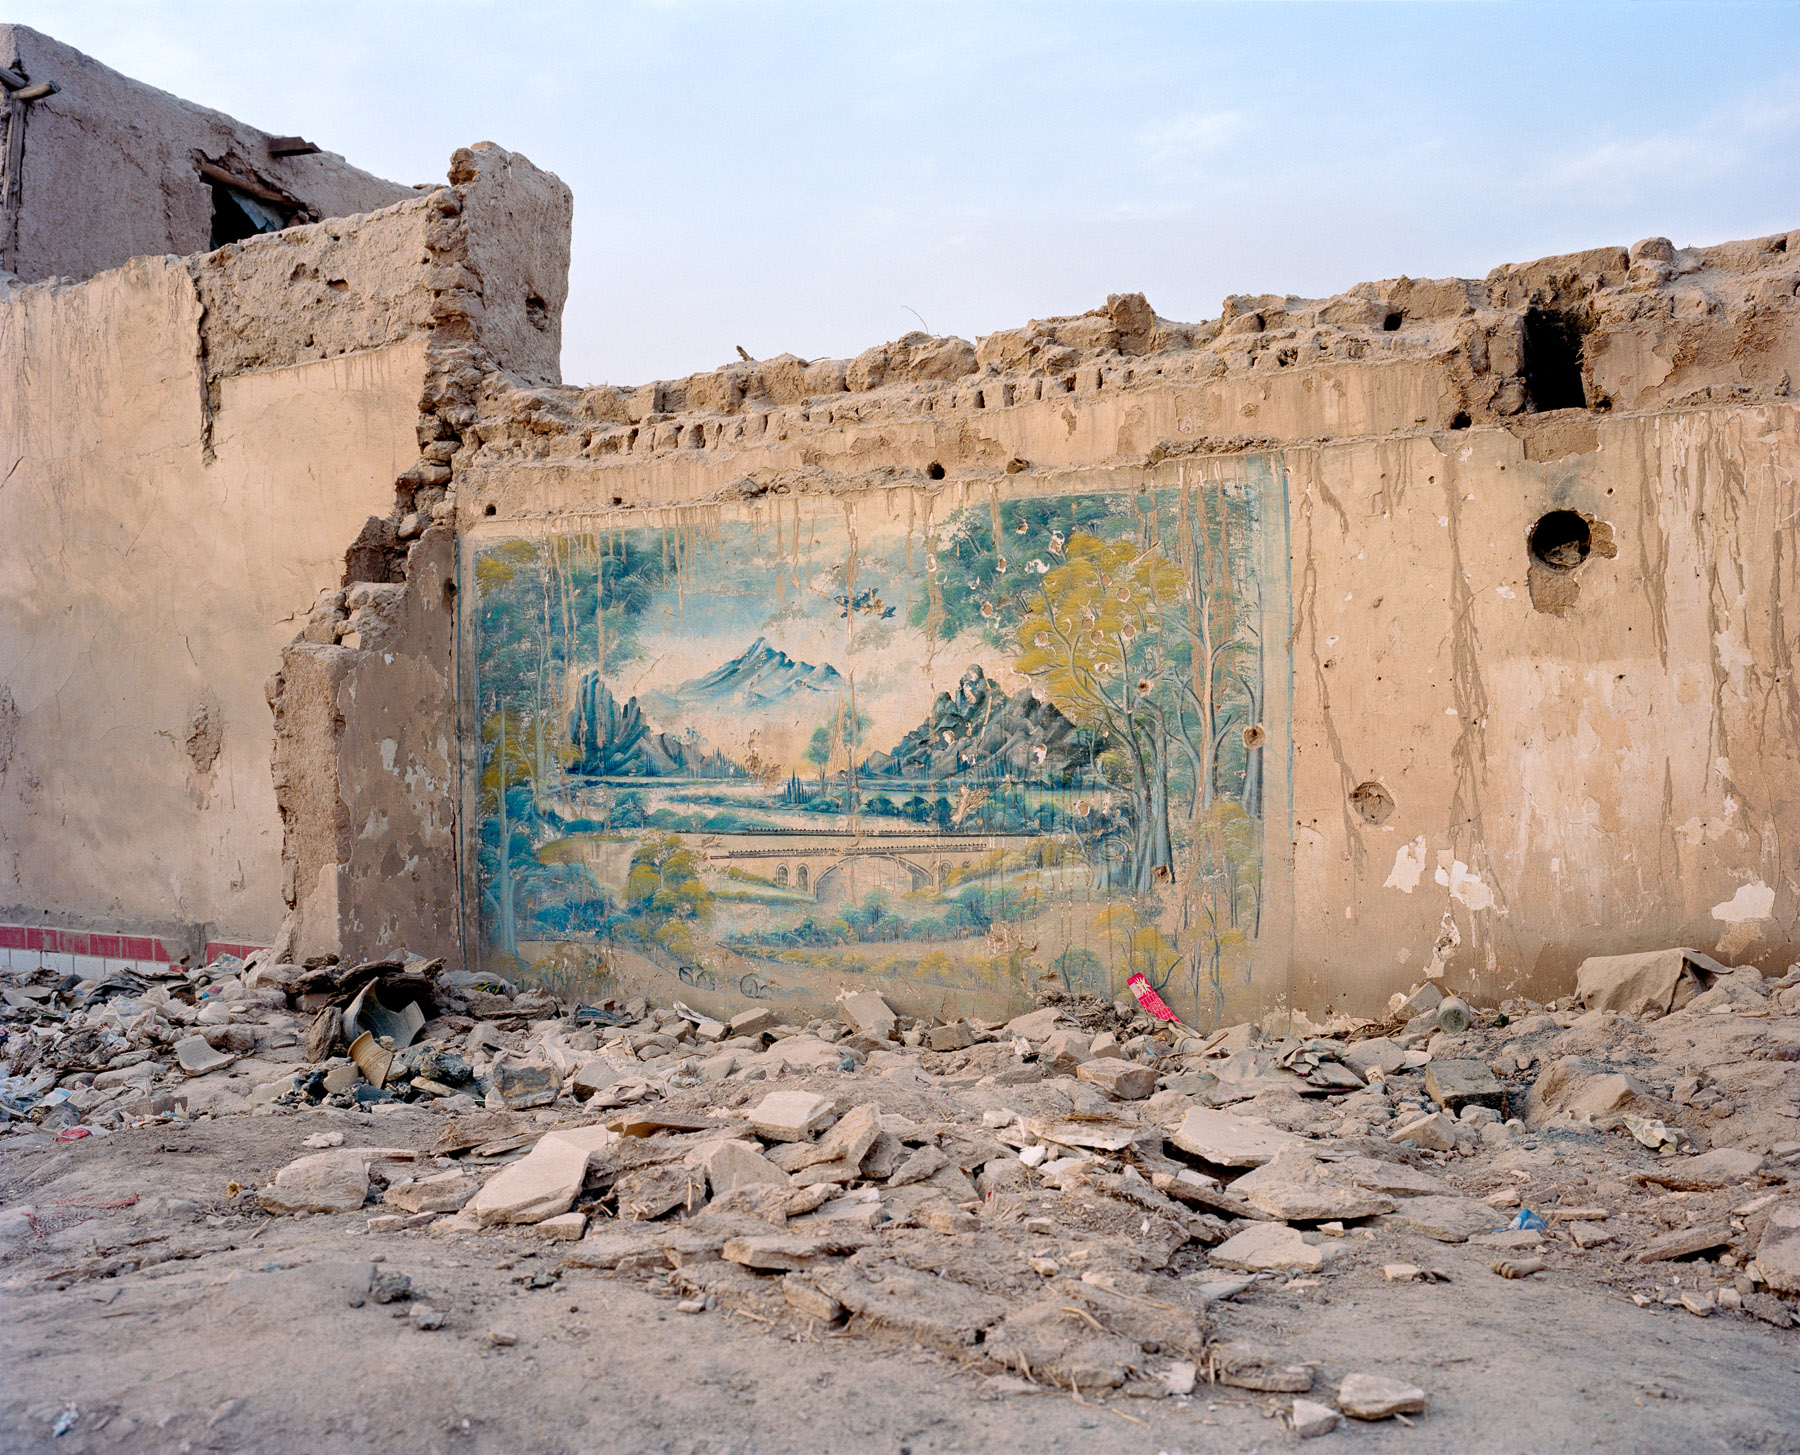  May 2016. Xinjiang province, China. Ruins of the old city of Kashgar, mostly destroyed by the Chinese authorities in order to build a new version of this ancient silk road city. After the destruction of Kabul during the civil war, the old city of Ka